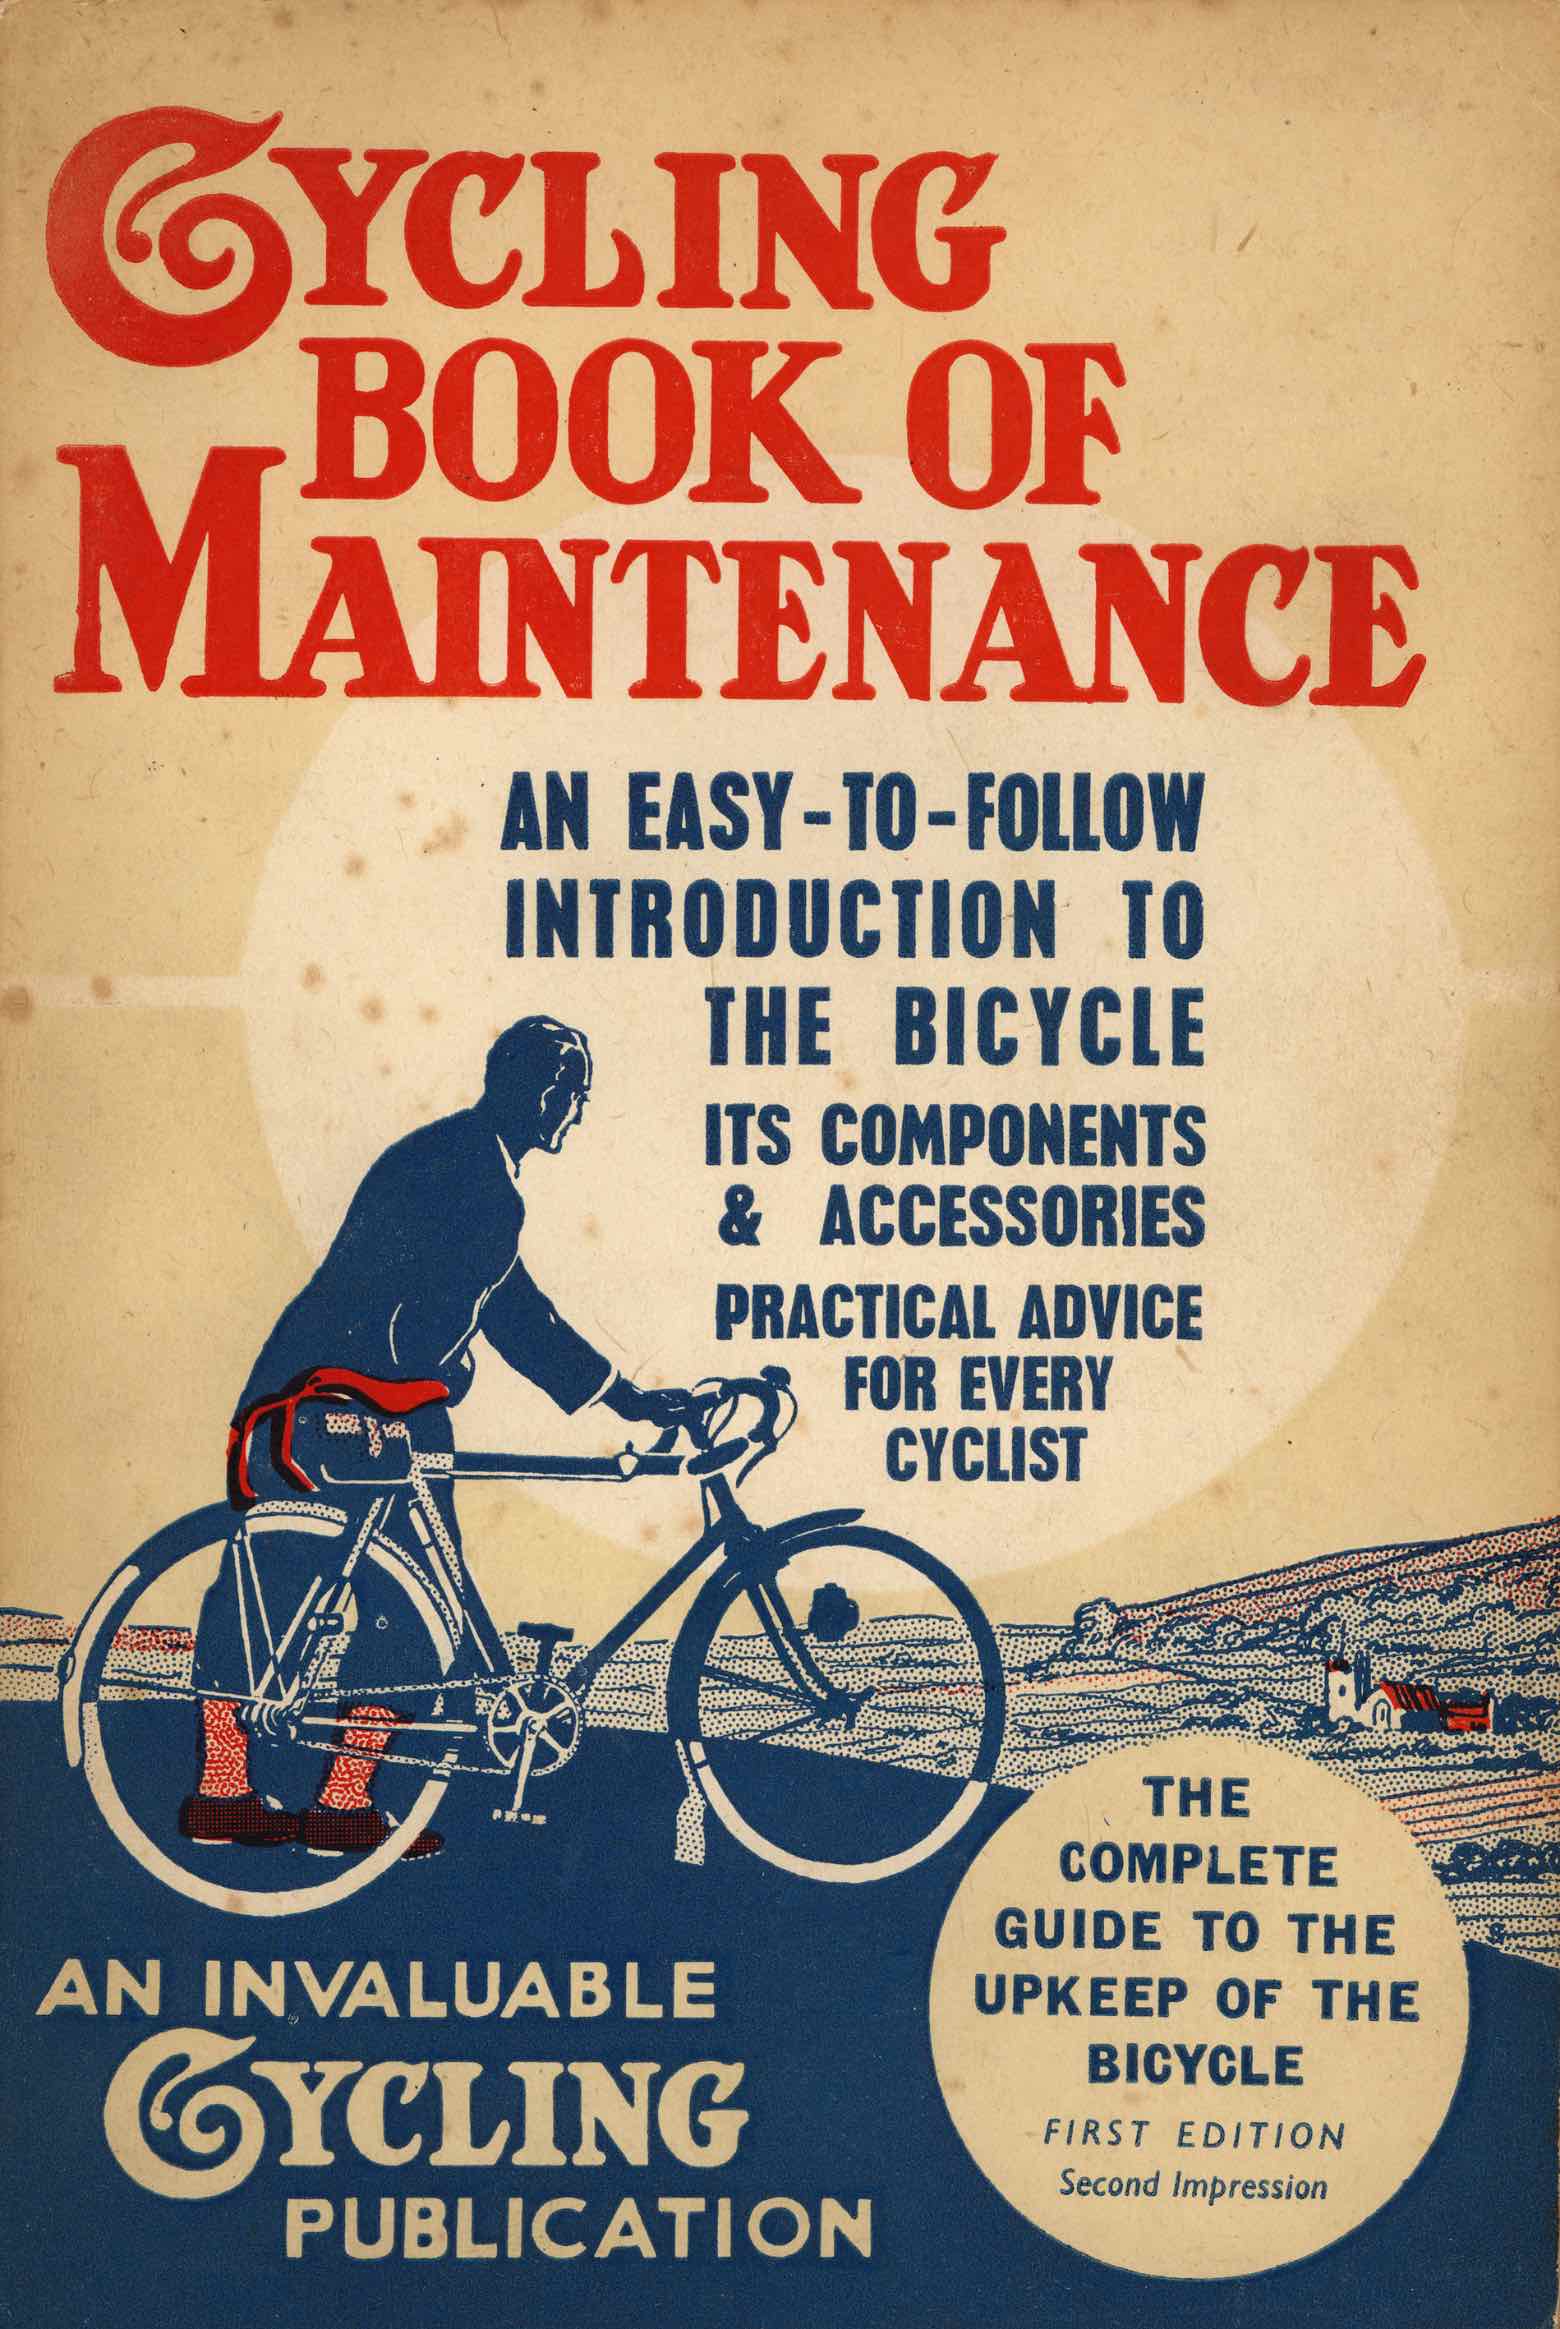 The staff of Cycling - Cycling Book of Maintenance front cover main image